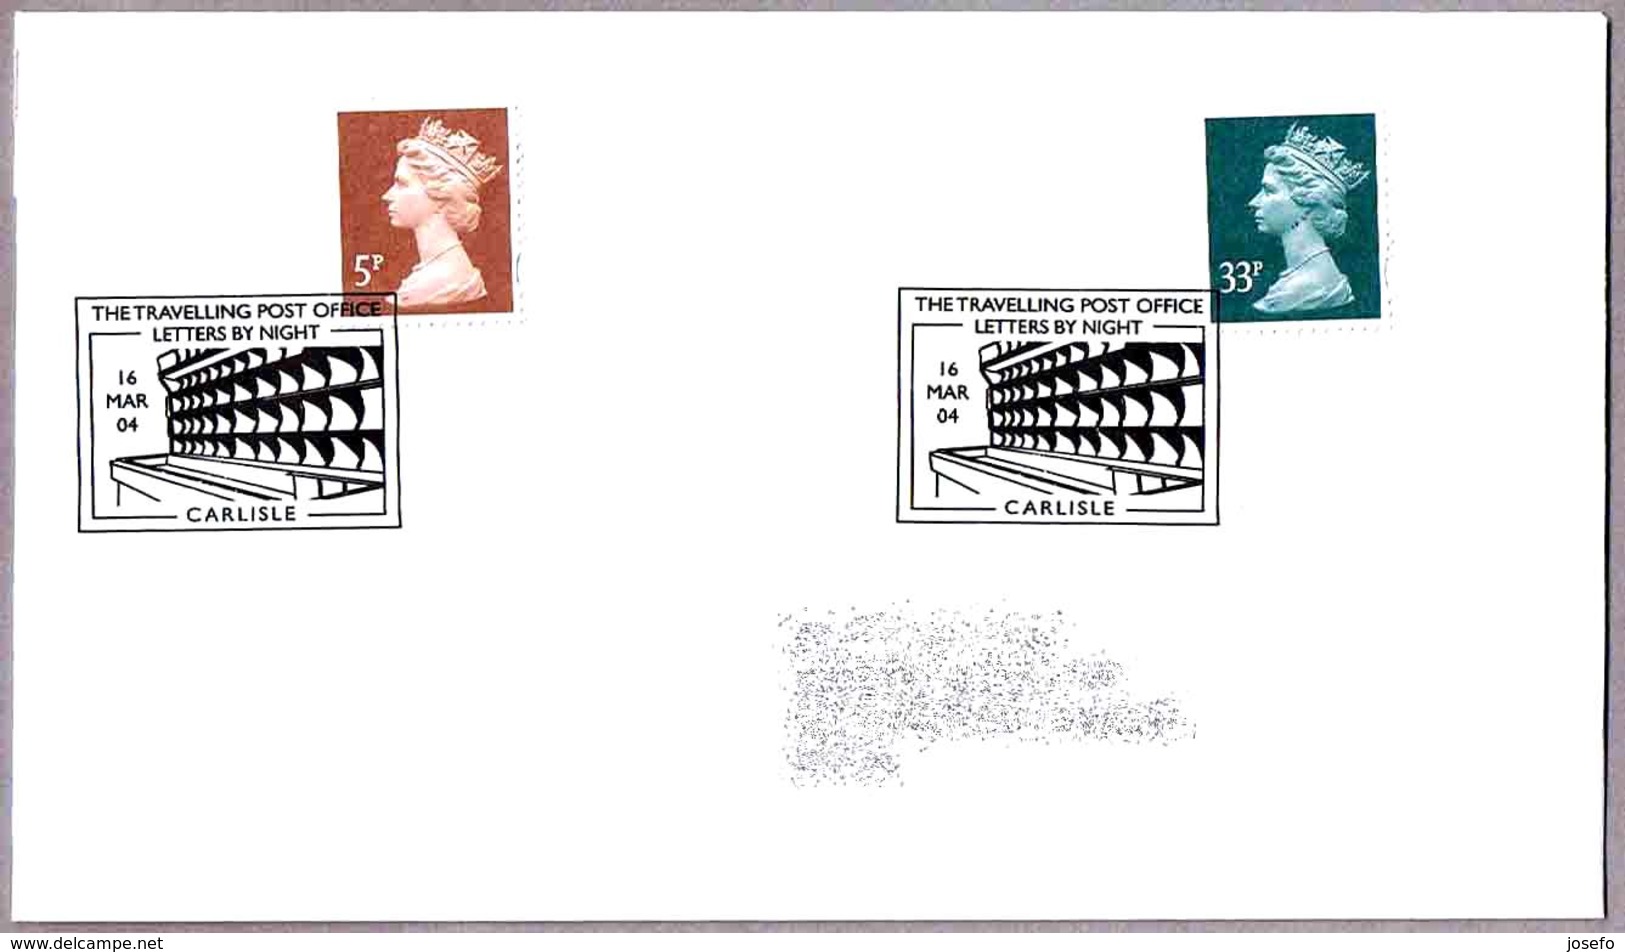 THE TRAVELLING POST OFFICE - LETTERS BY NIGHT - Correo Nocturno. Carlisle 2004 - Correo Postal